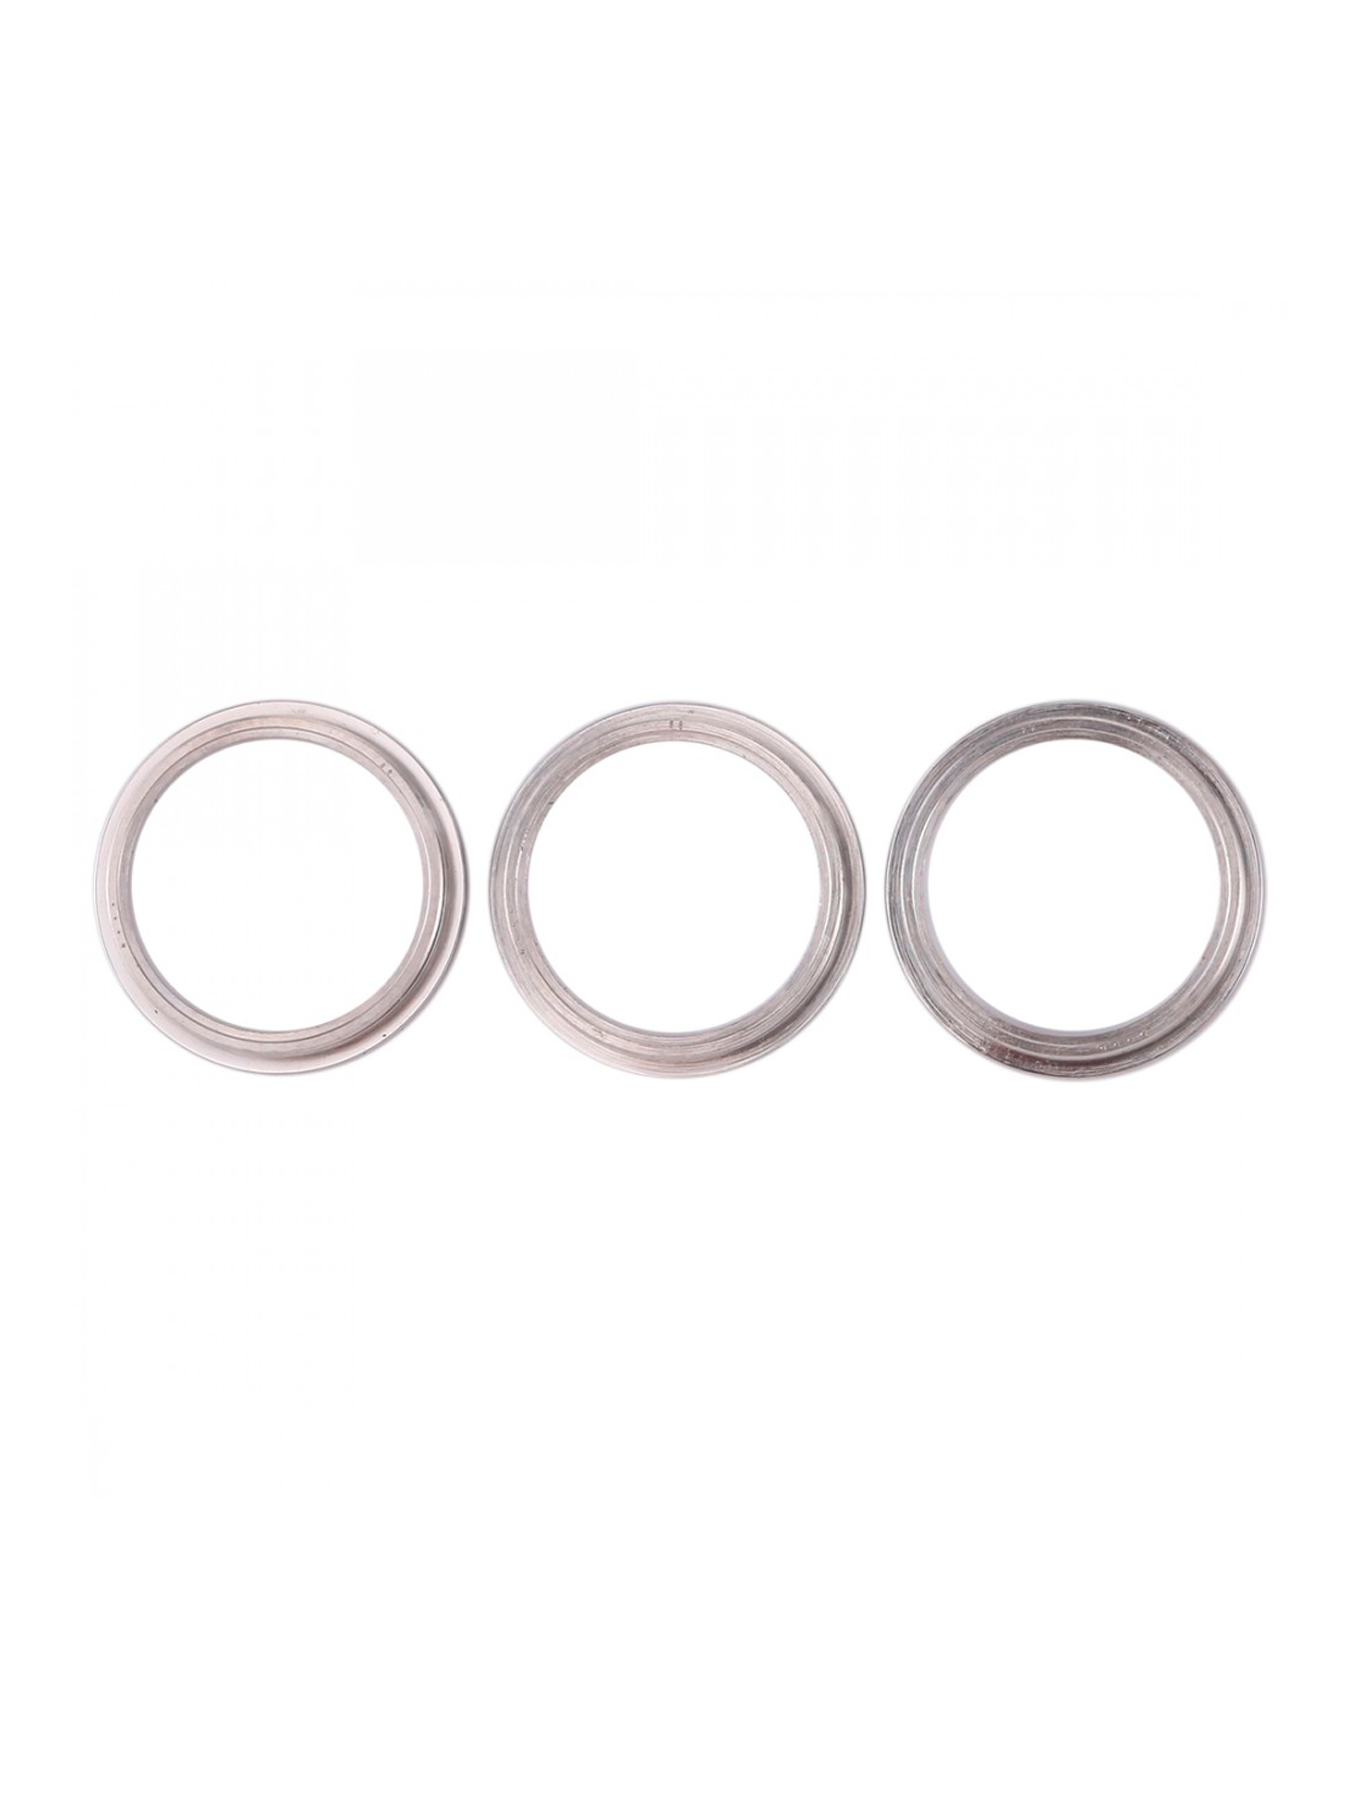 WHITE - BACK CAMERA BEZEL RING ONLY ONLY (3 PIECE SET) FOR IPHONE 11 PRO / 11 PRO MAX  (10 PACK)